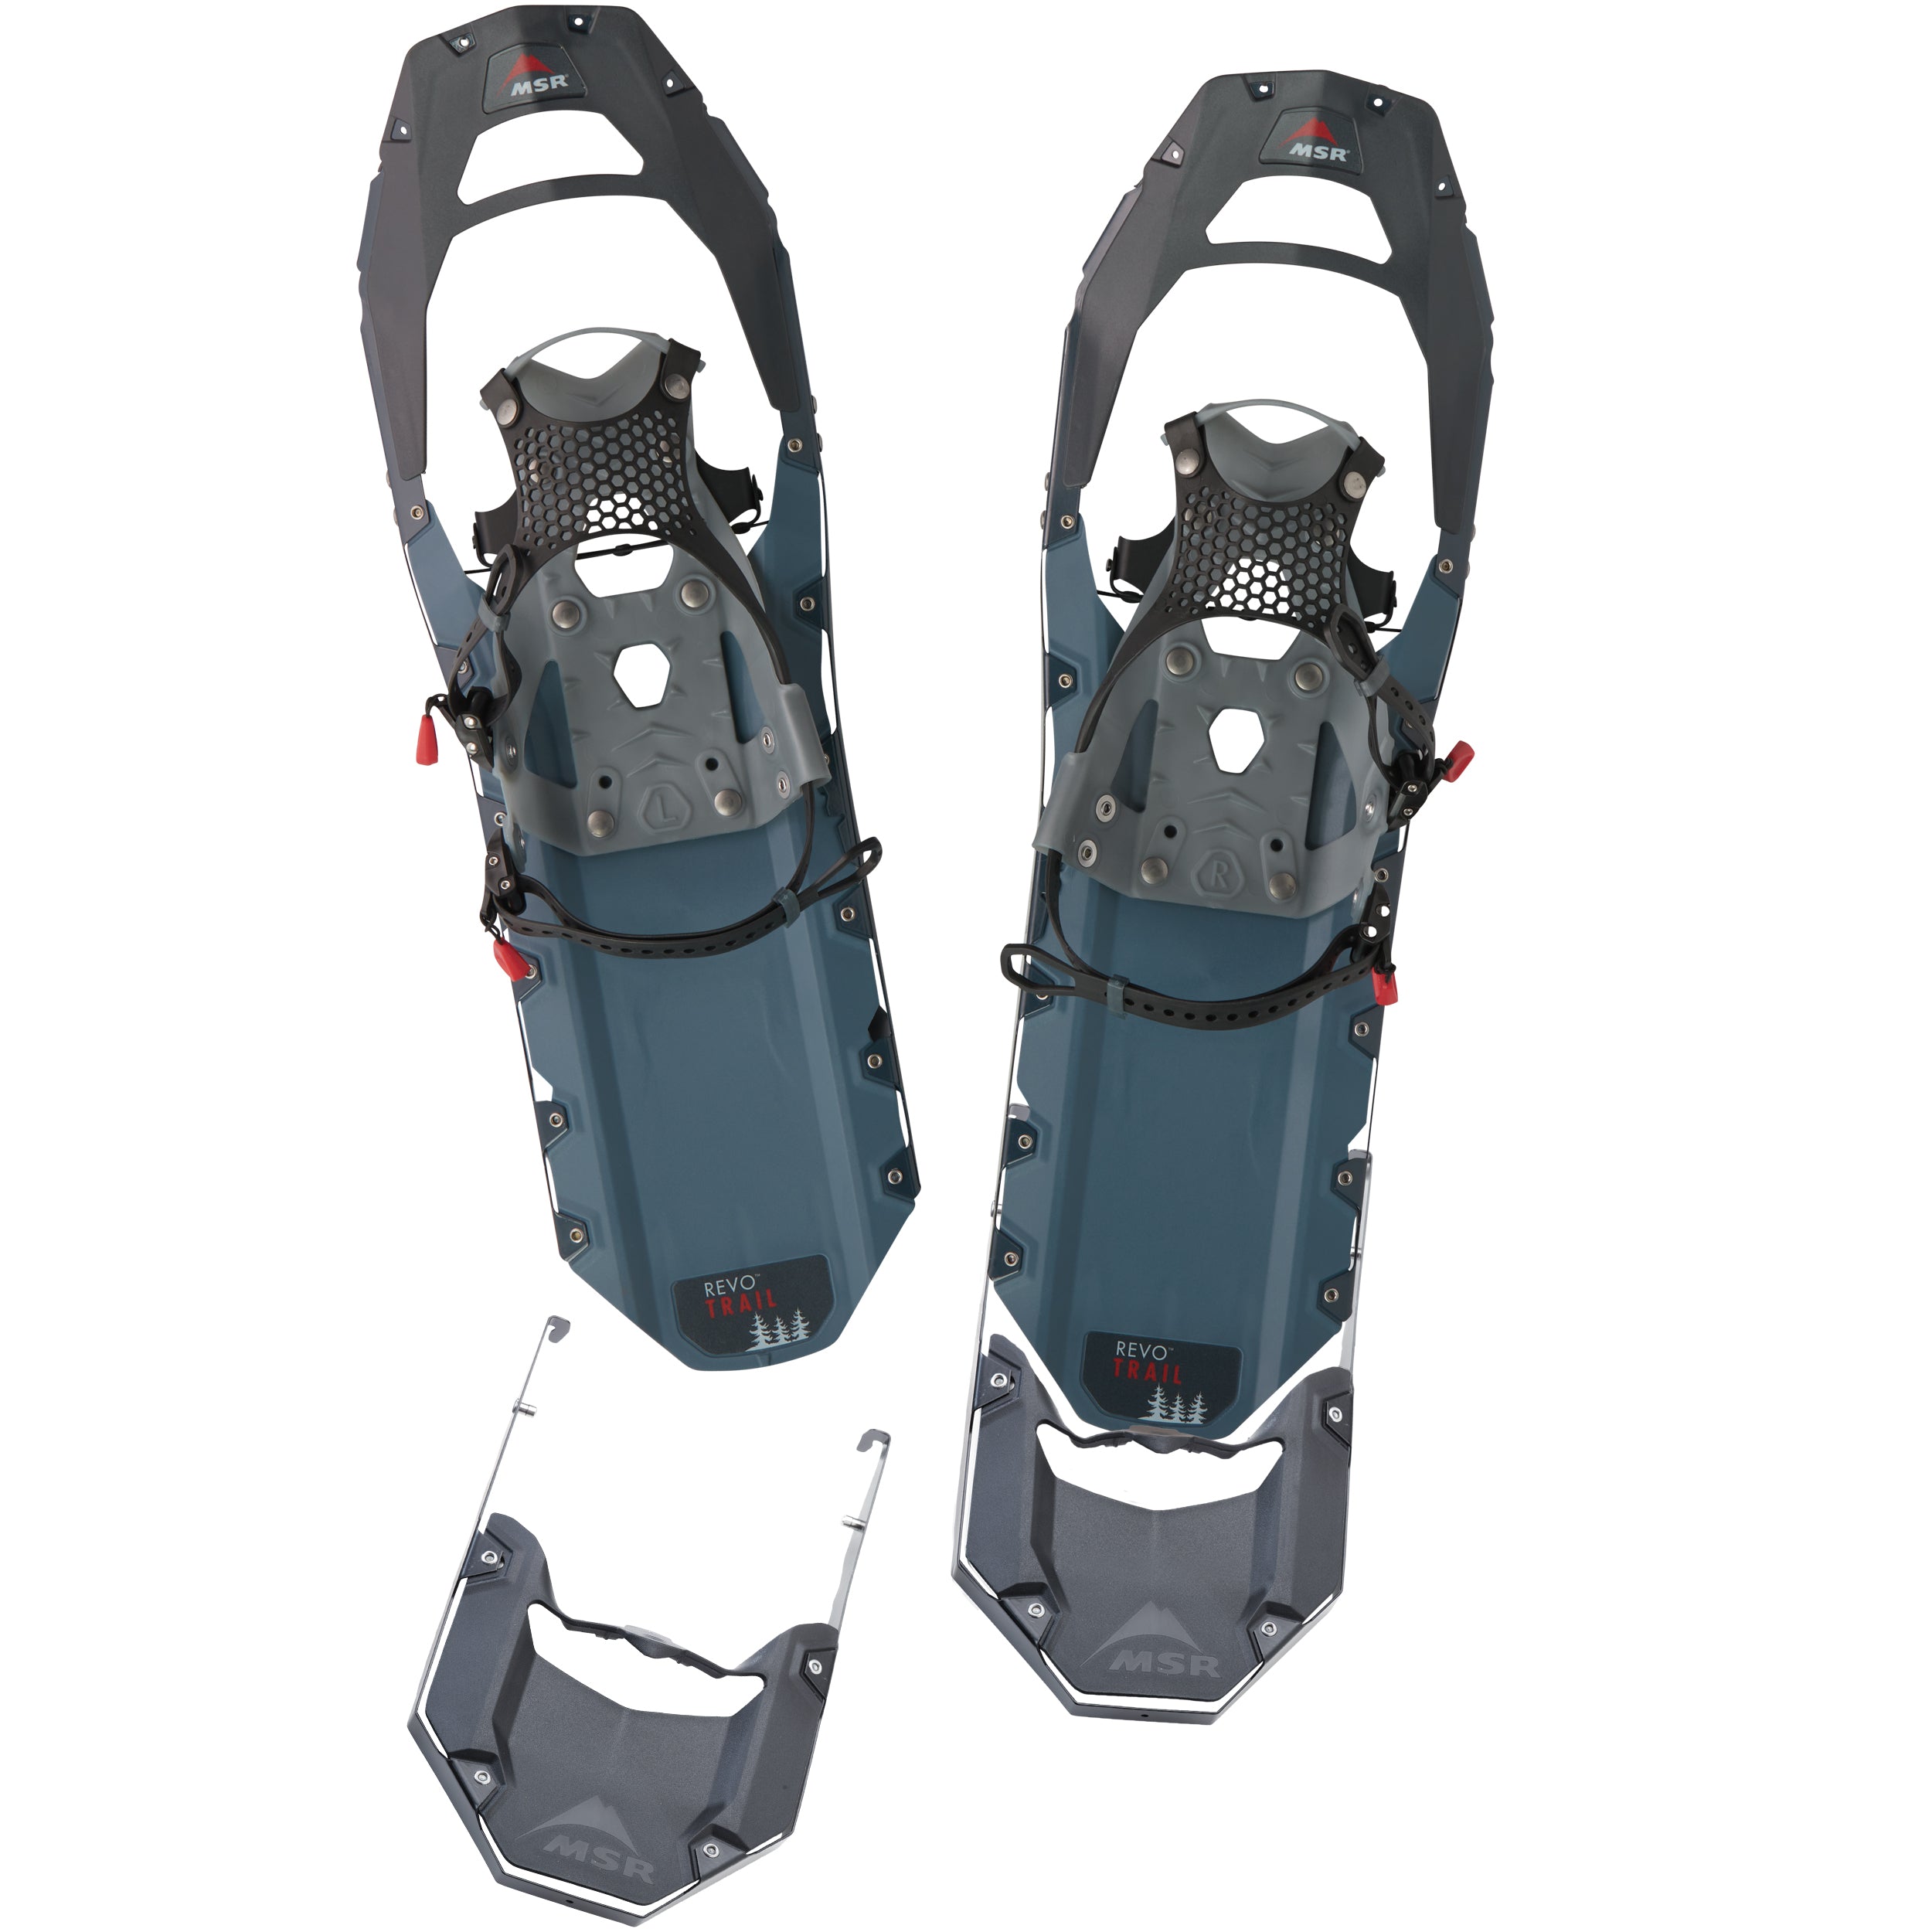 MSR Revo Tail/Extensions for Snowshoes